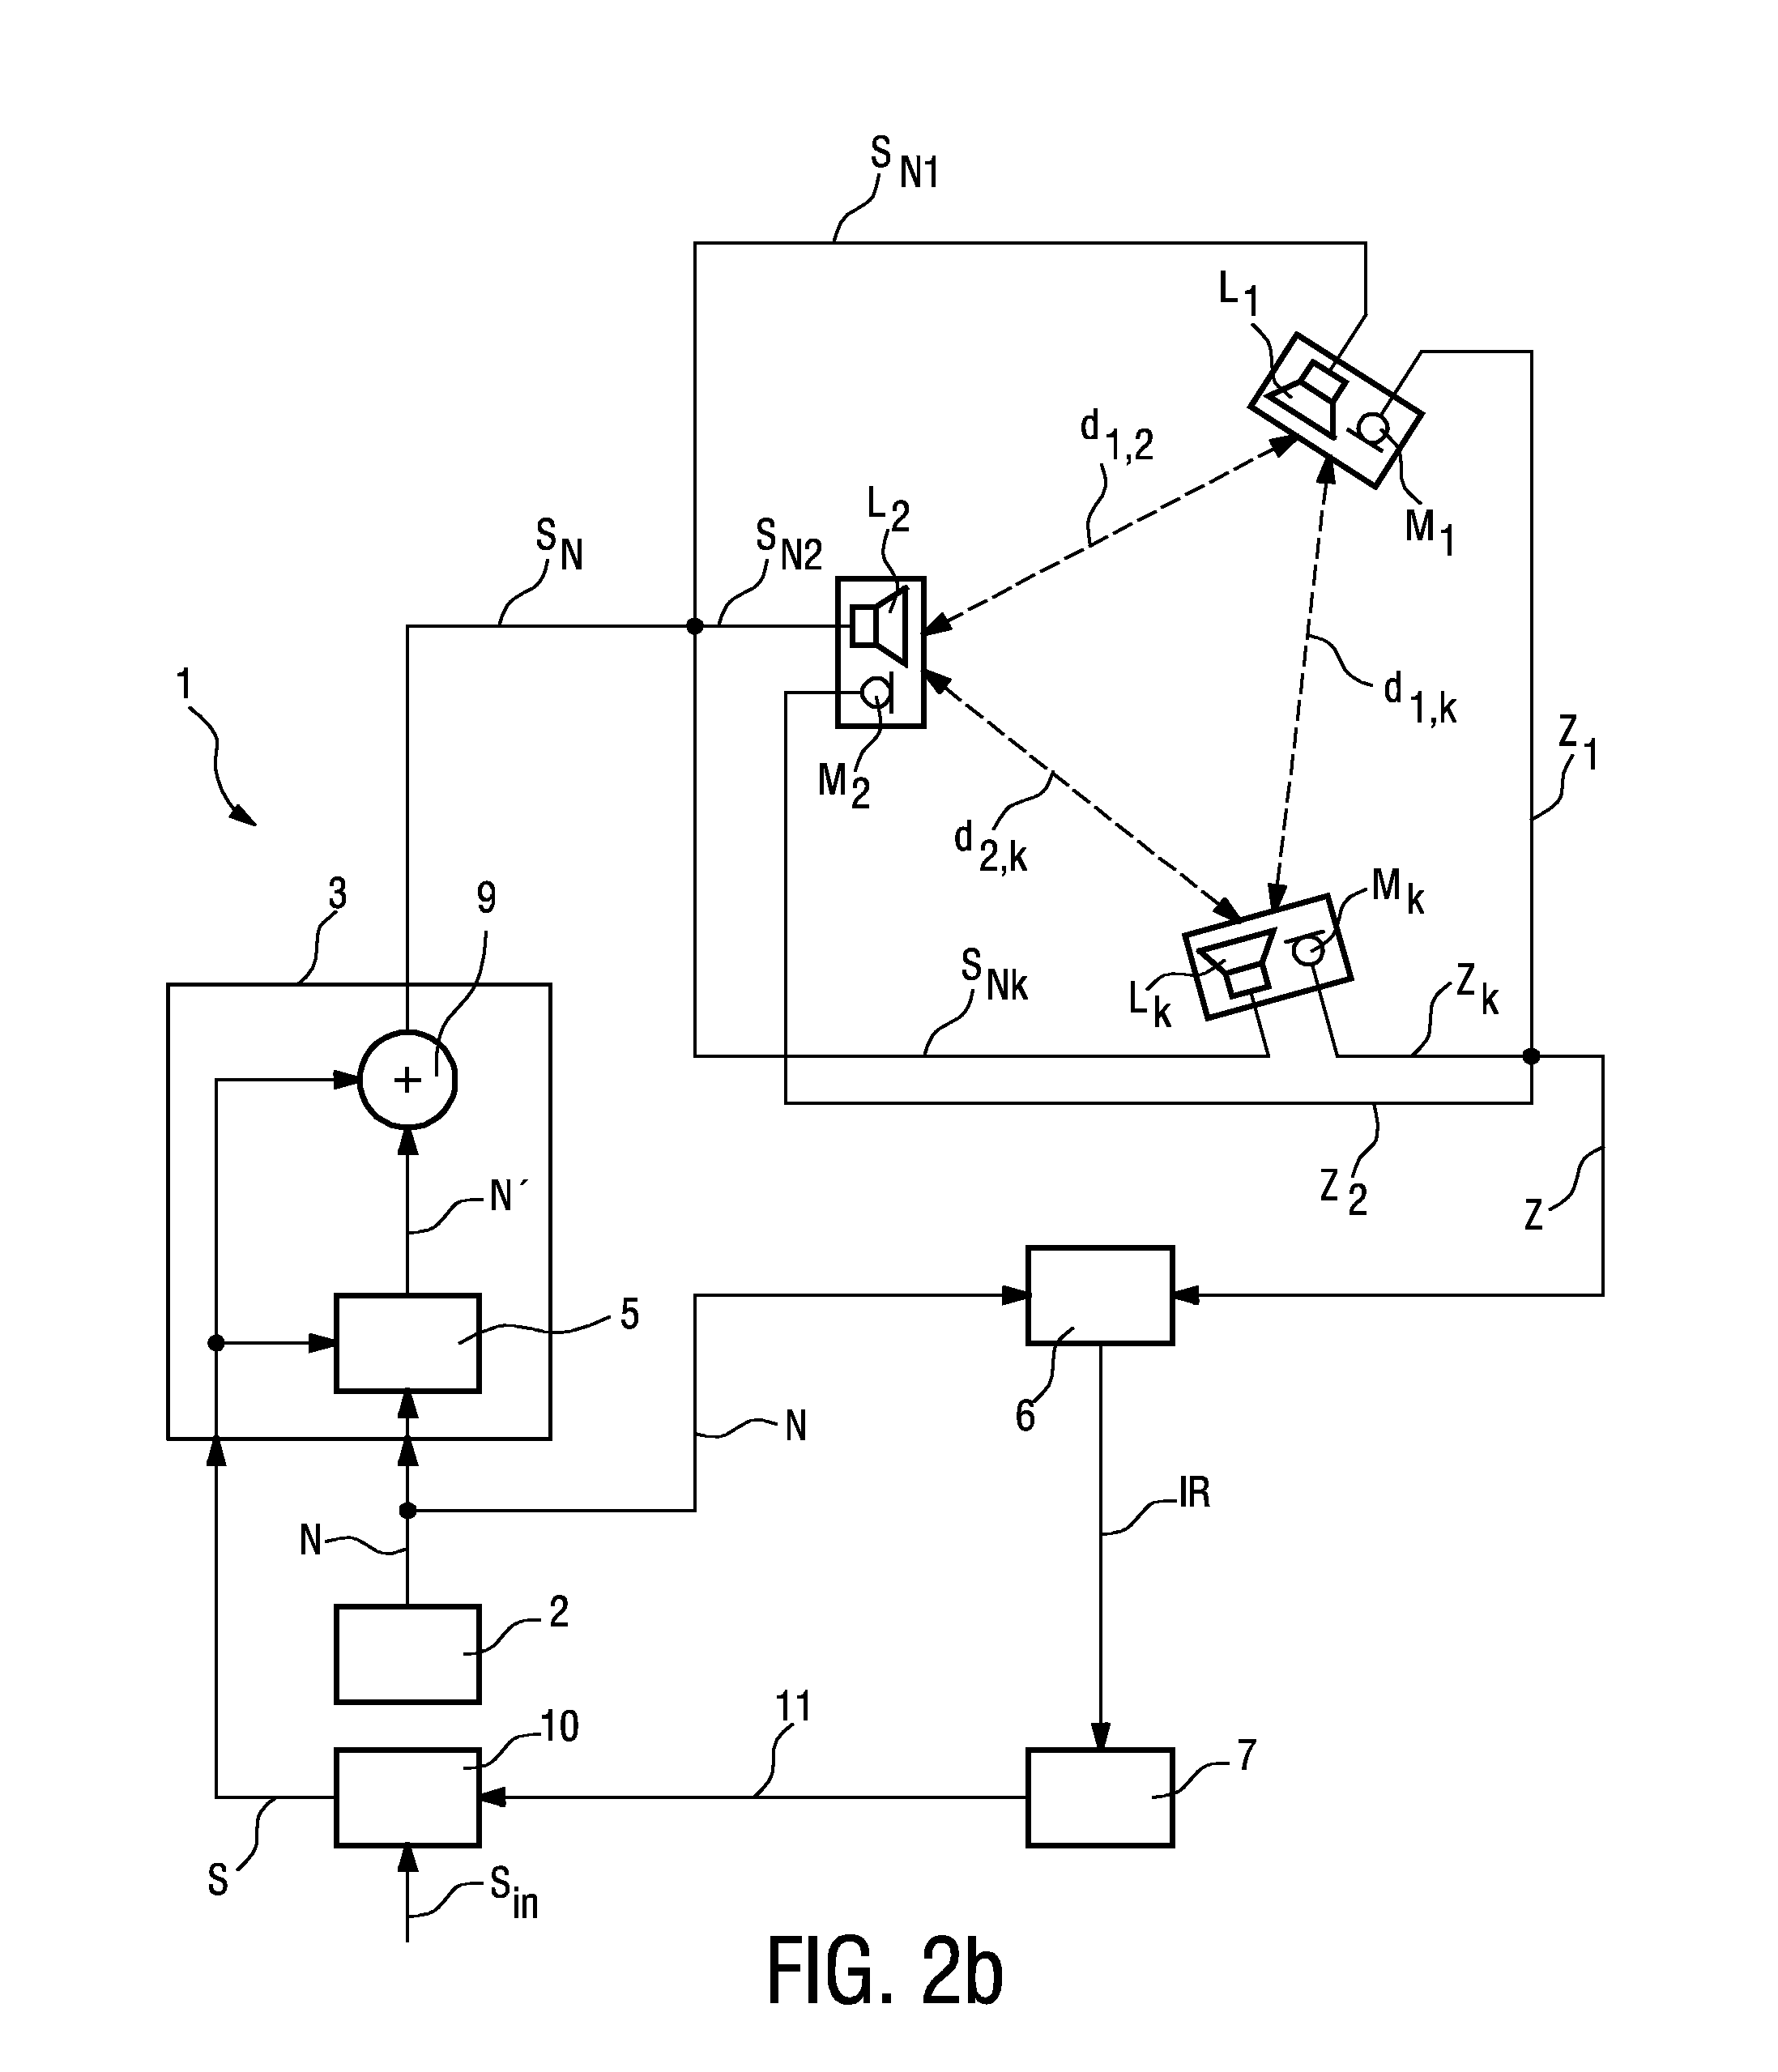 Method of and system for determining distances between loudspeakers